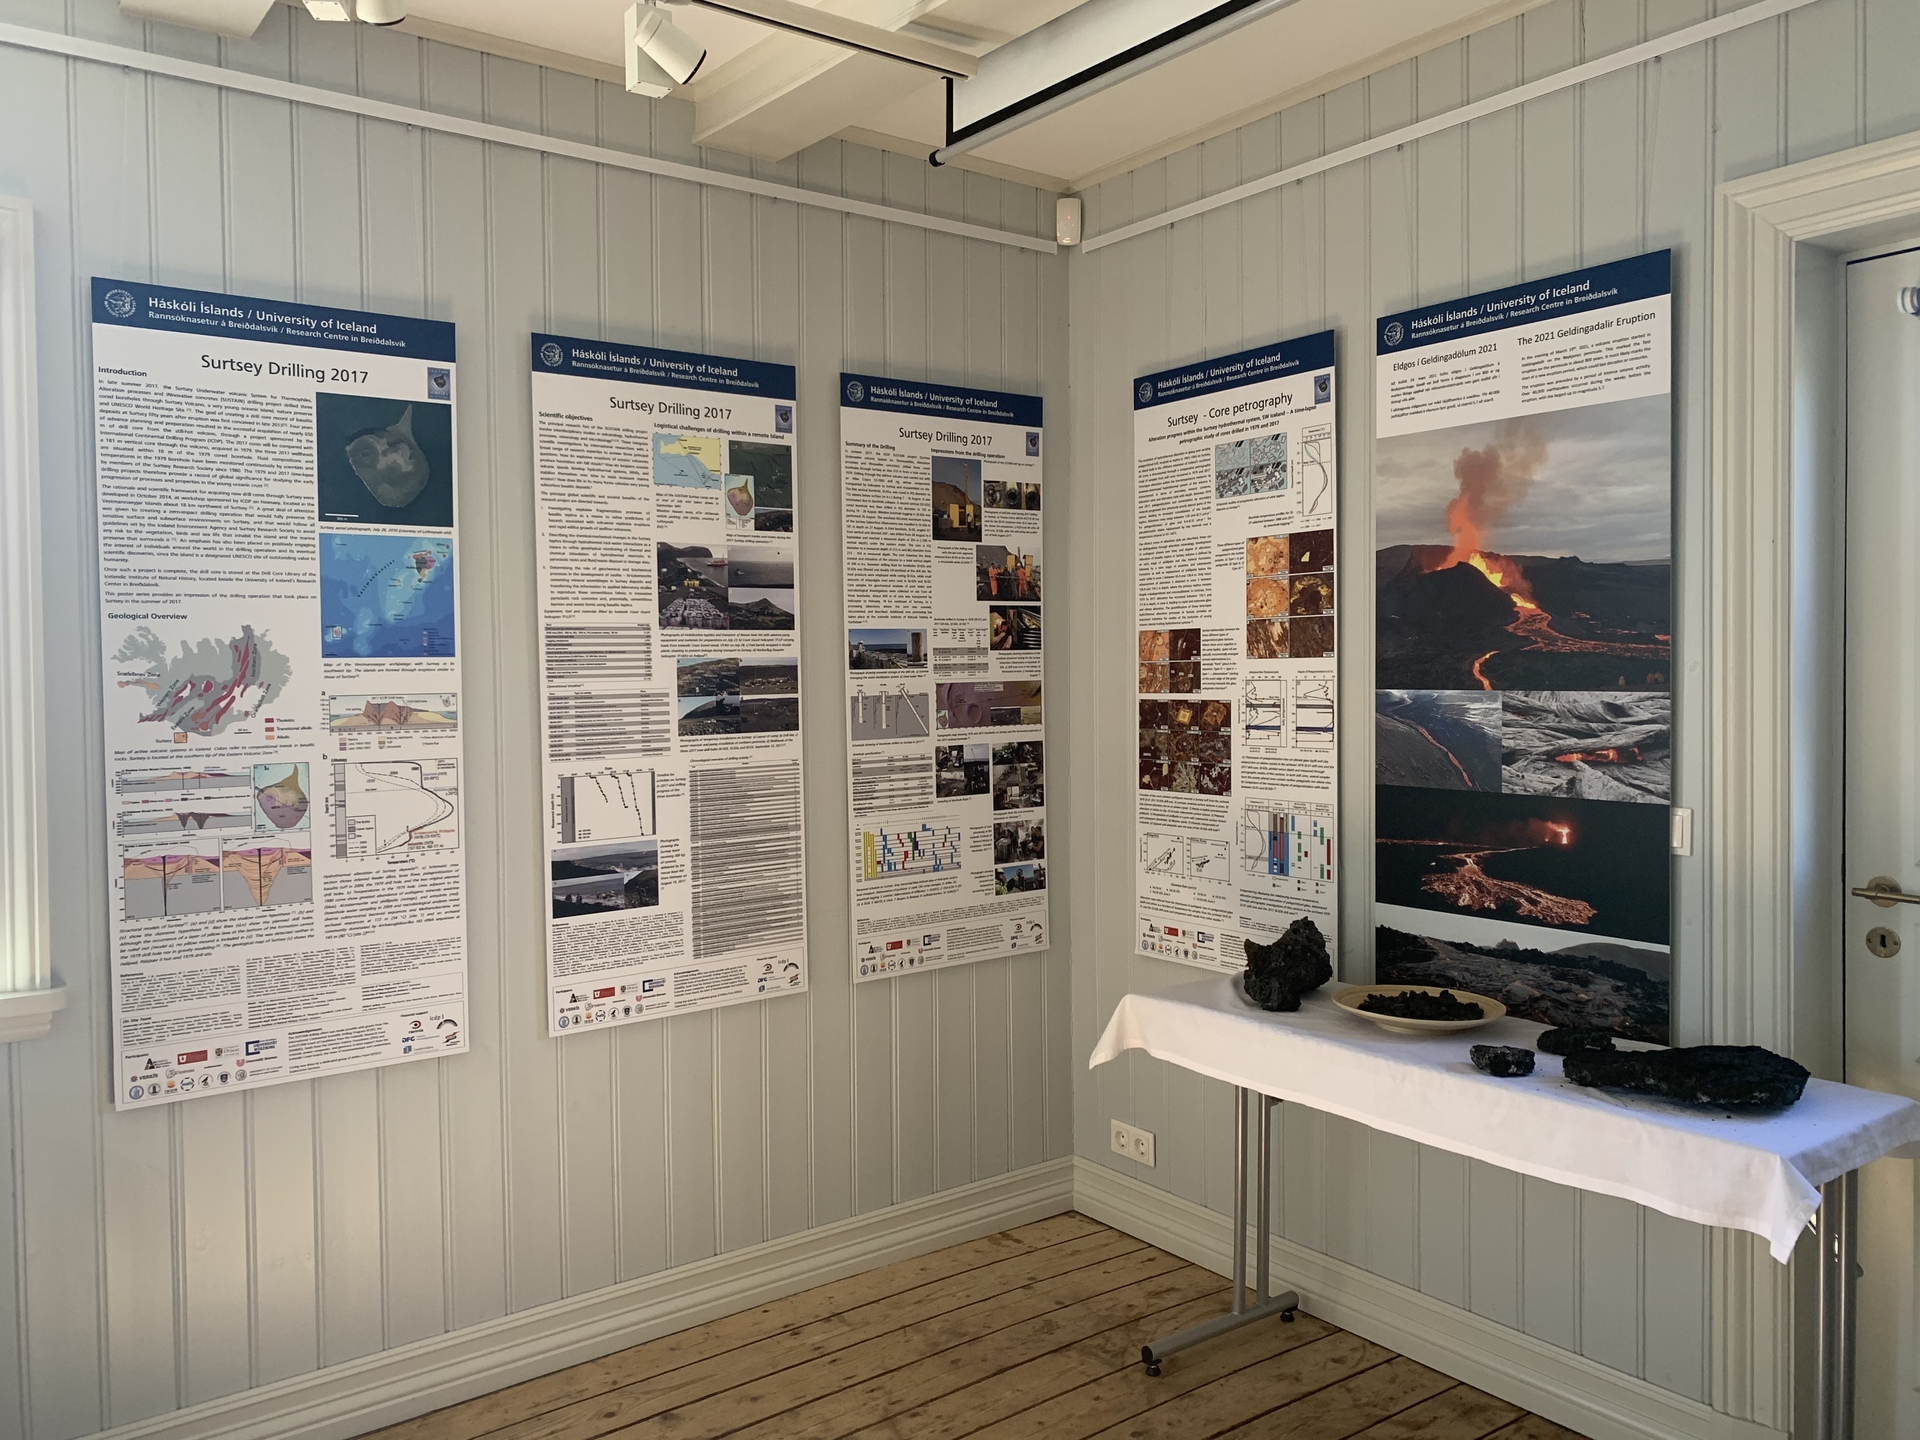 Posters on research drilling in Surtsey and the eruption in Geldingadalir